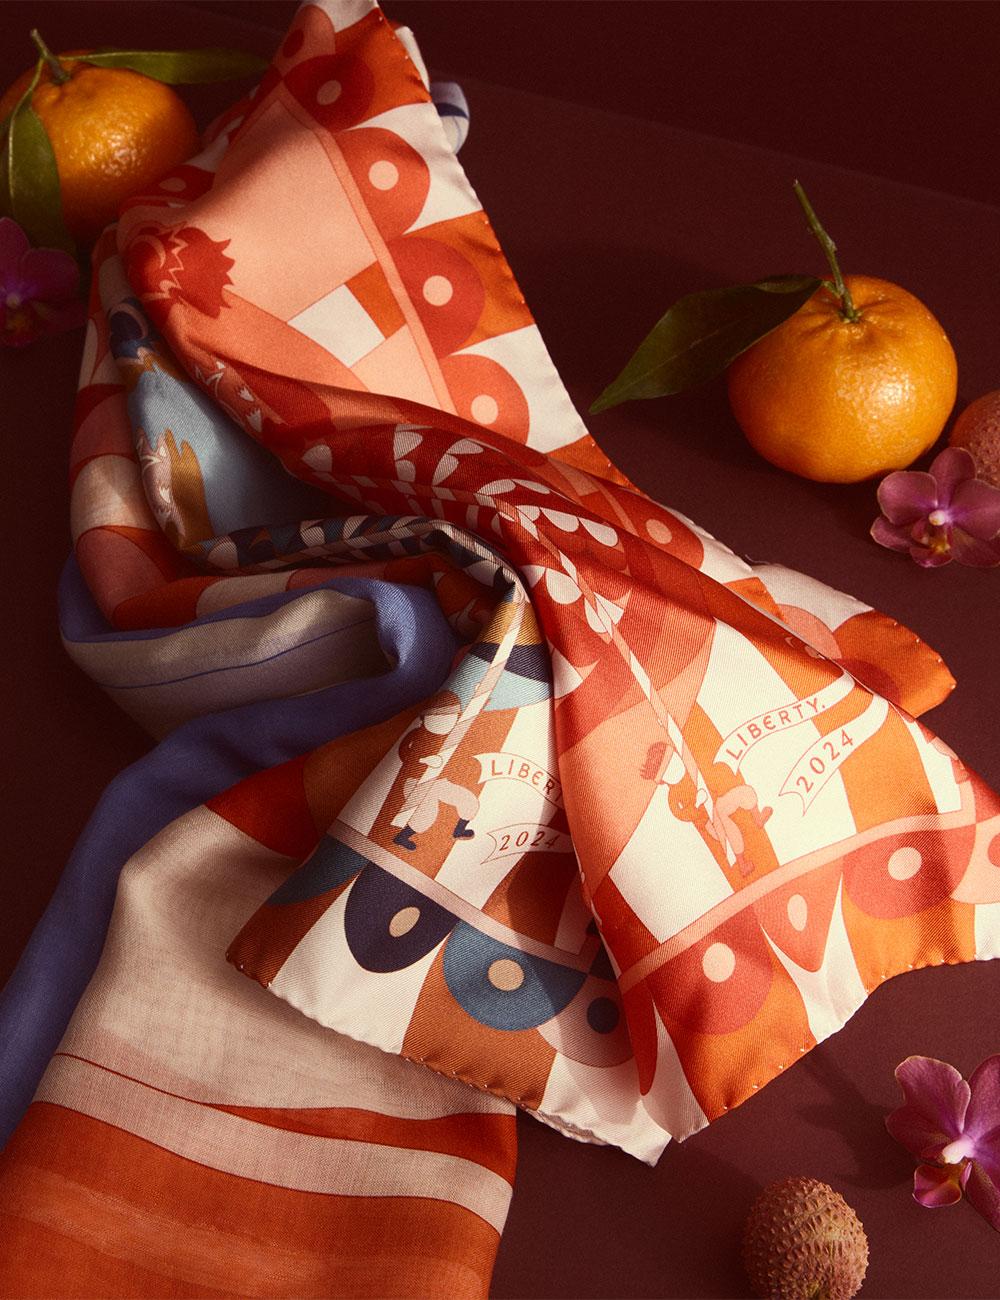 https://i8.amplience.net/i/liberty/lunar-new-year-gifts-scarves-foled?fmt=auto&qlt=75